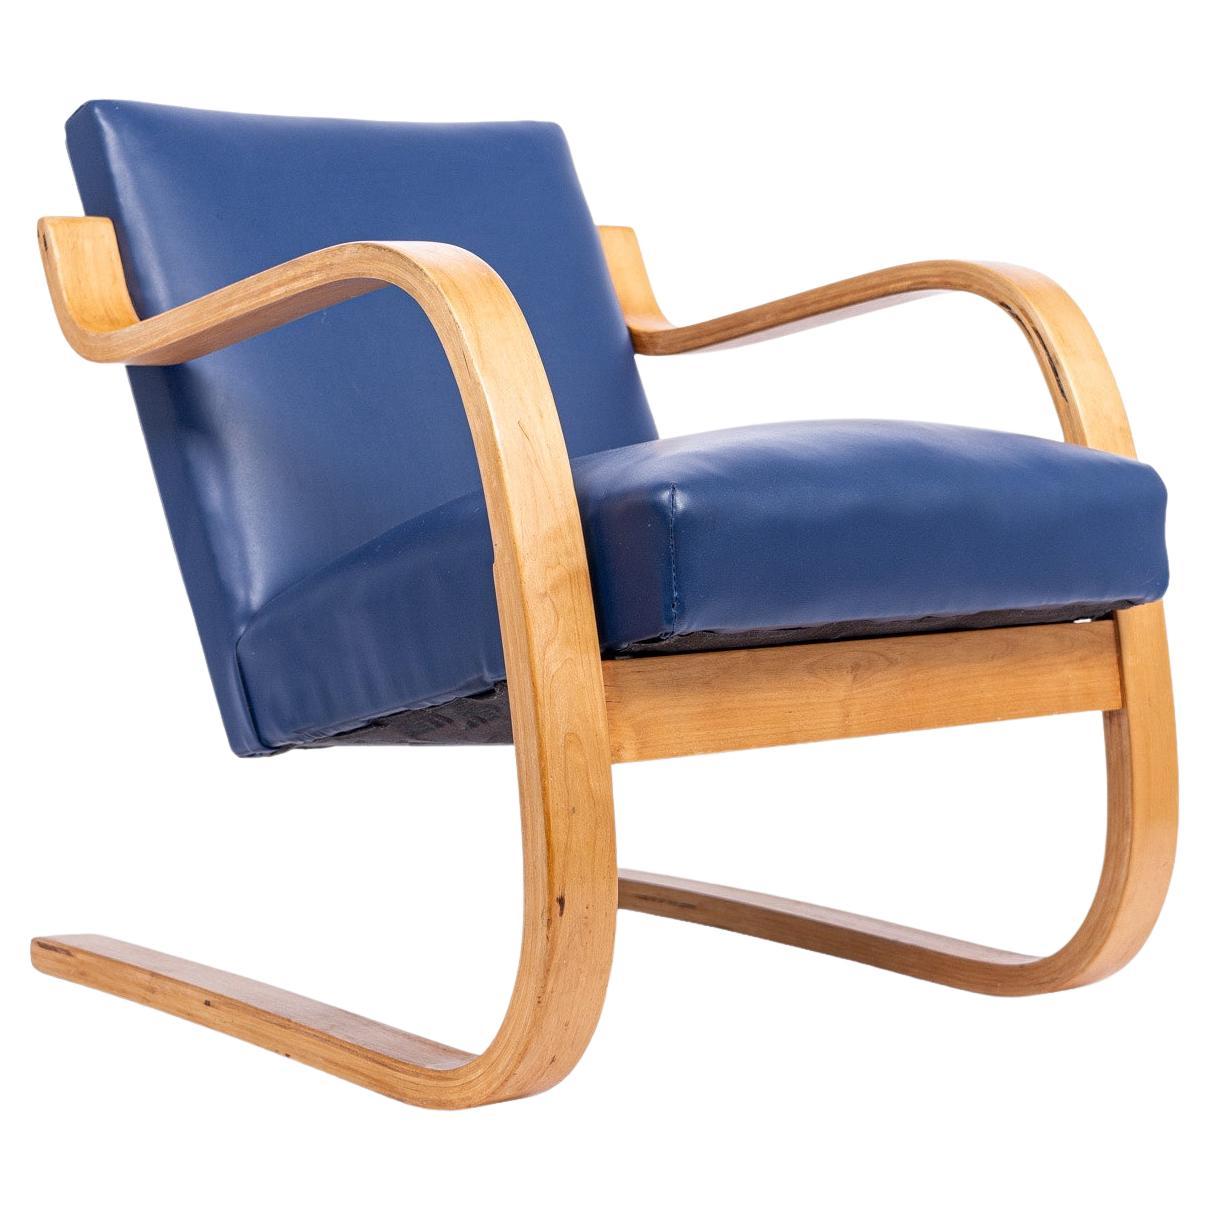 Early Model 402 Armchair by Alvar Aalto for Artek, Made in Finland, 1930s For Sale